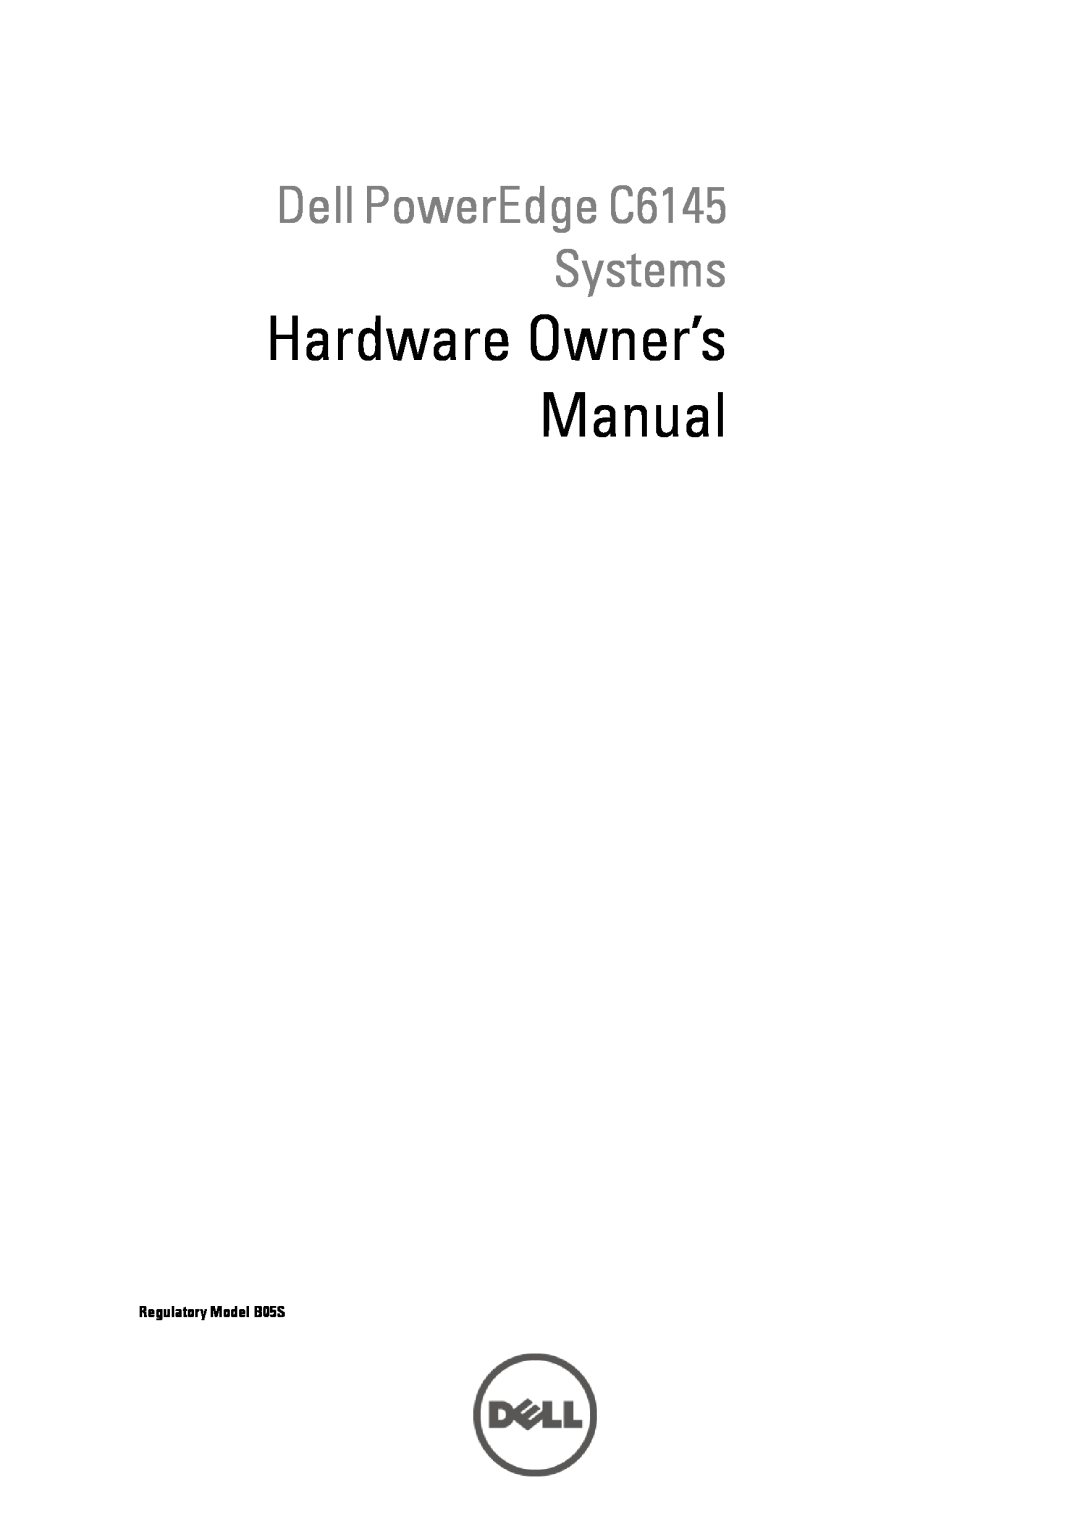 Dell manual Hardware Owner’s Manual, Dell PowerEdge C6145 Systems, Regulatory Model B05S 